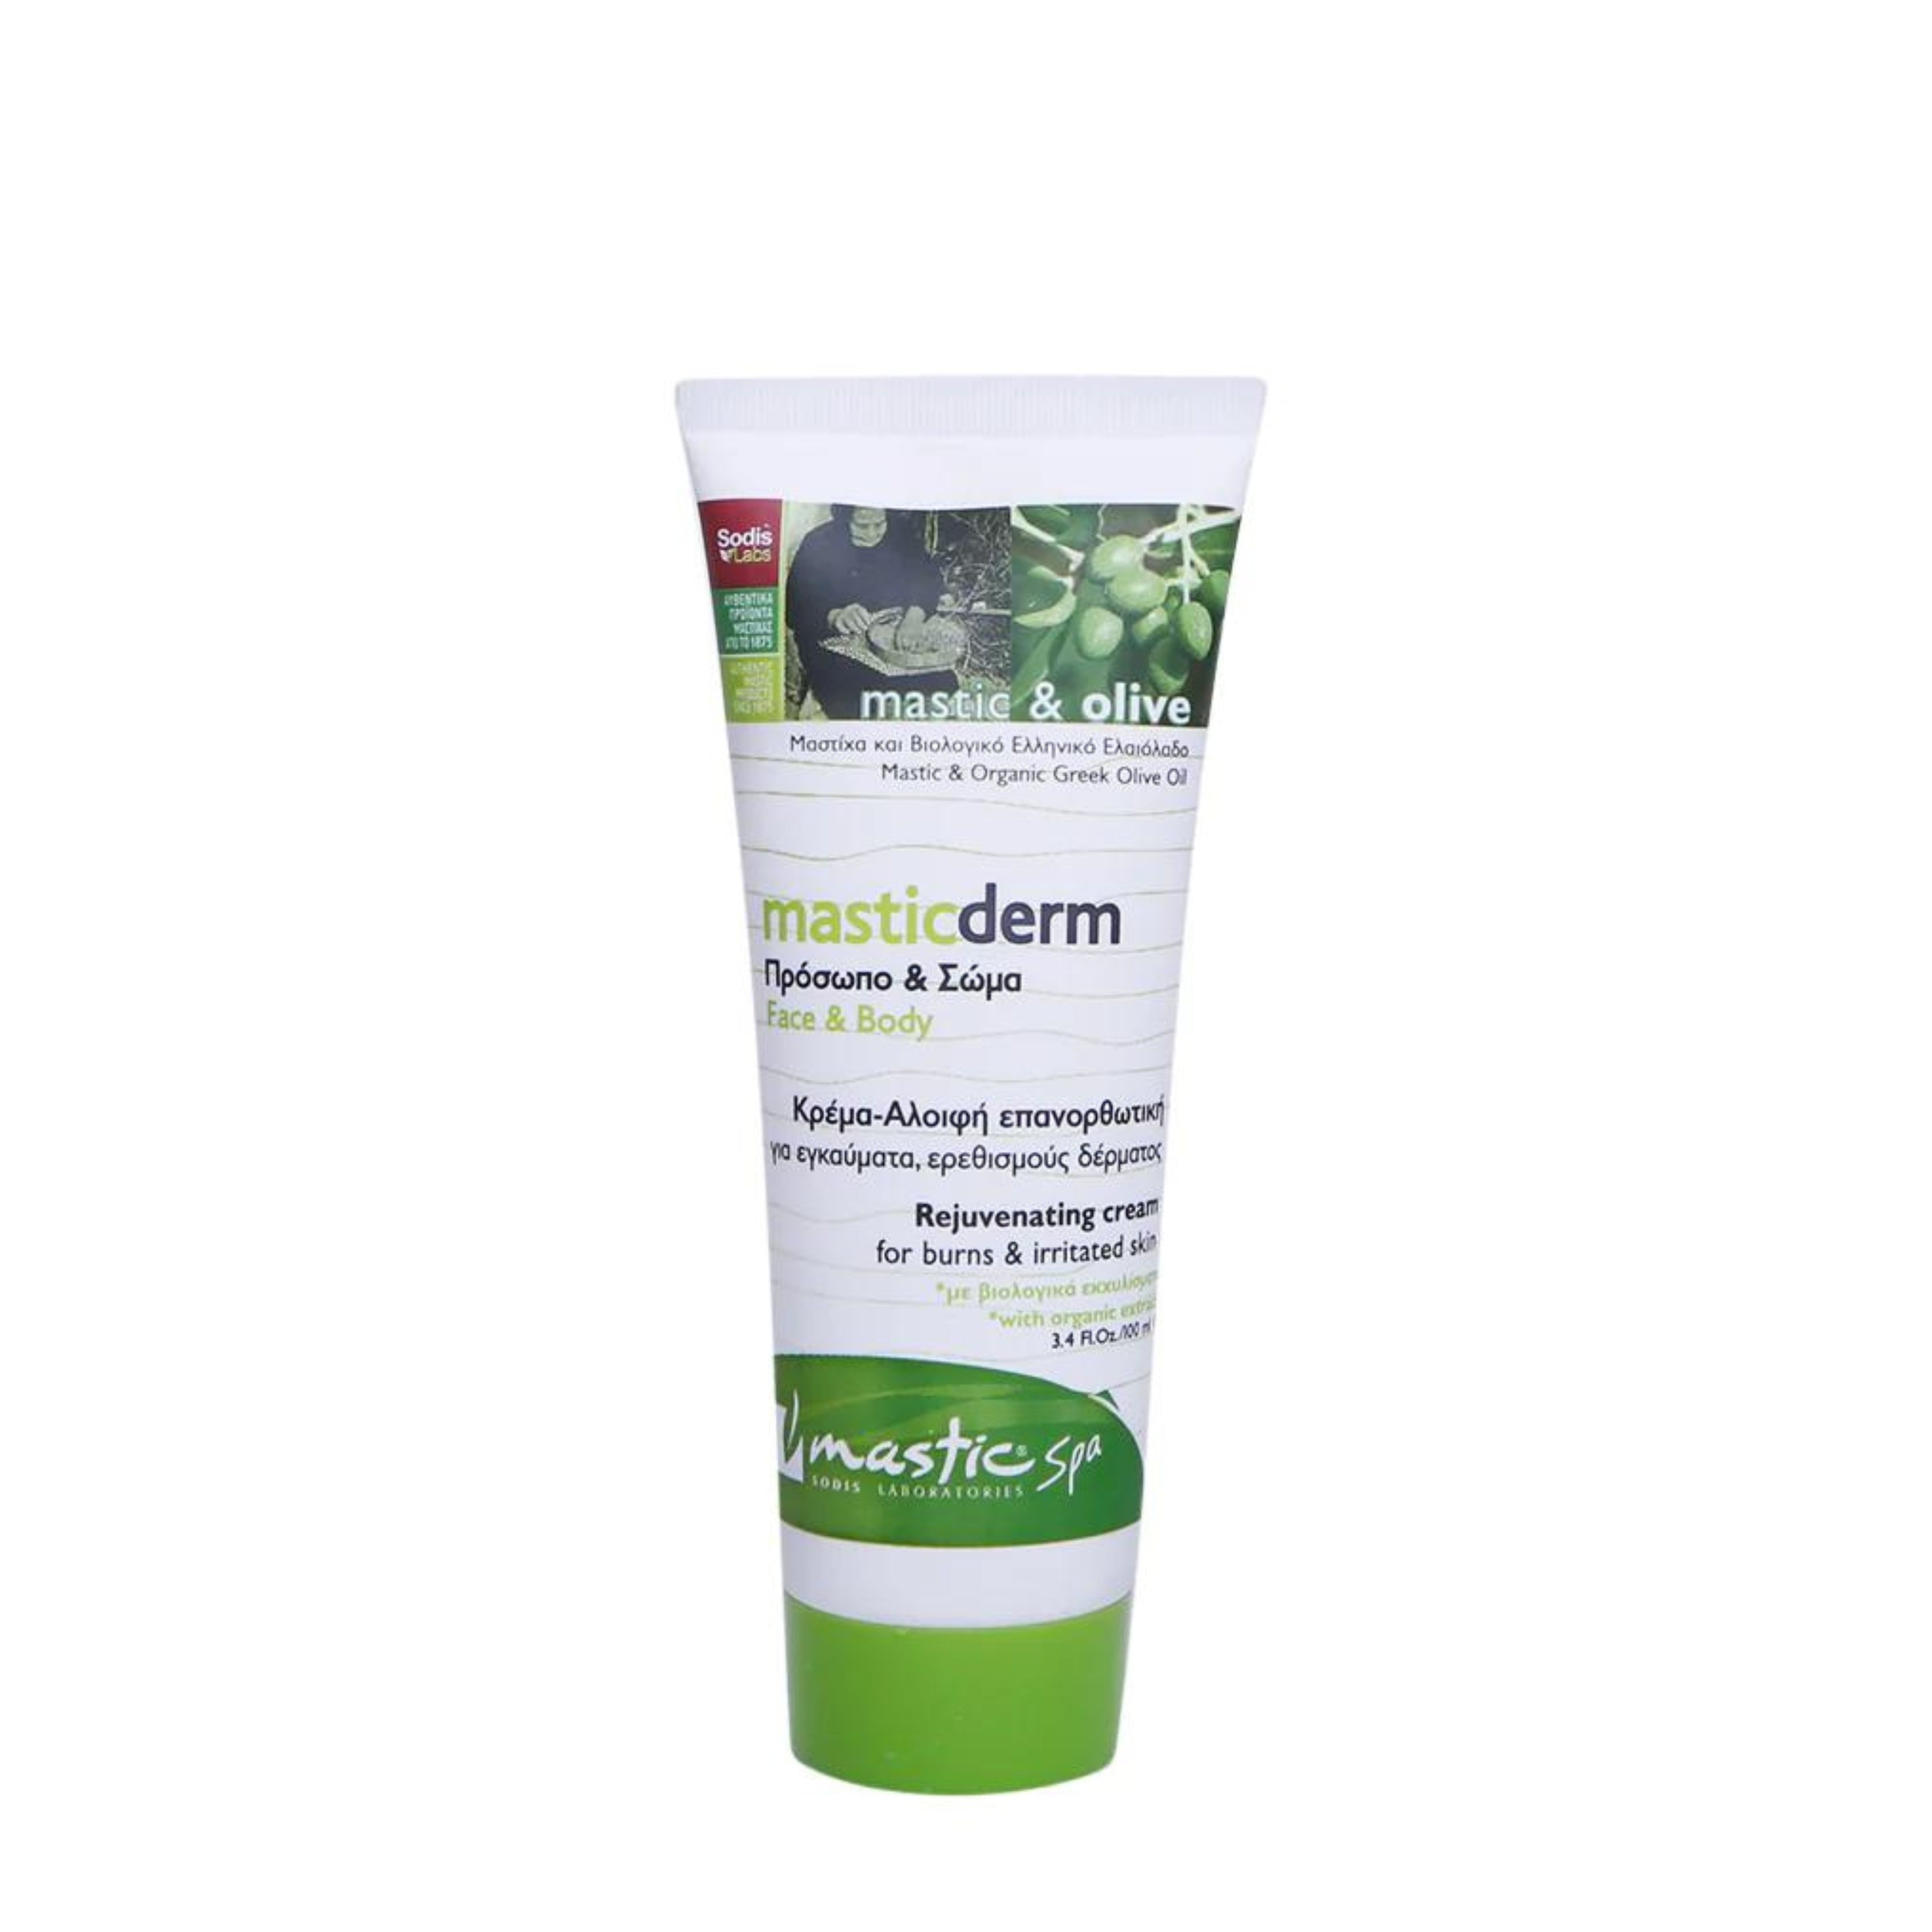 Masticderm cream with mastic and olive oil – 100ml